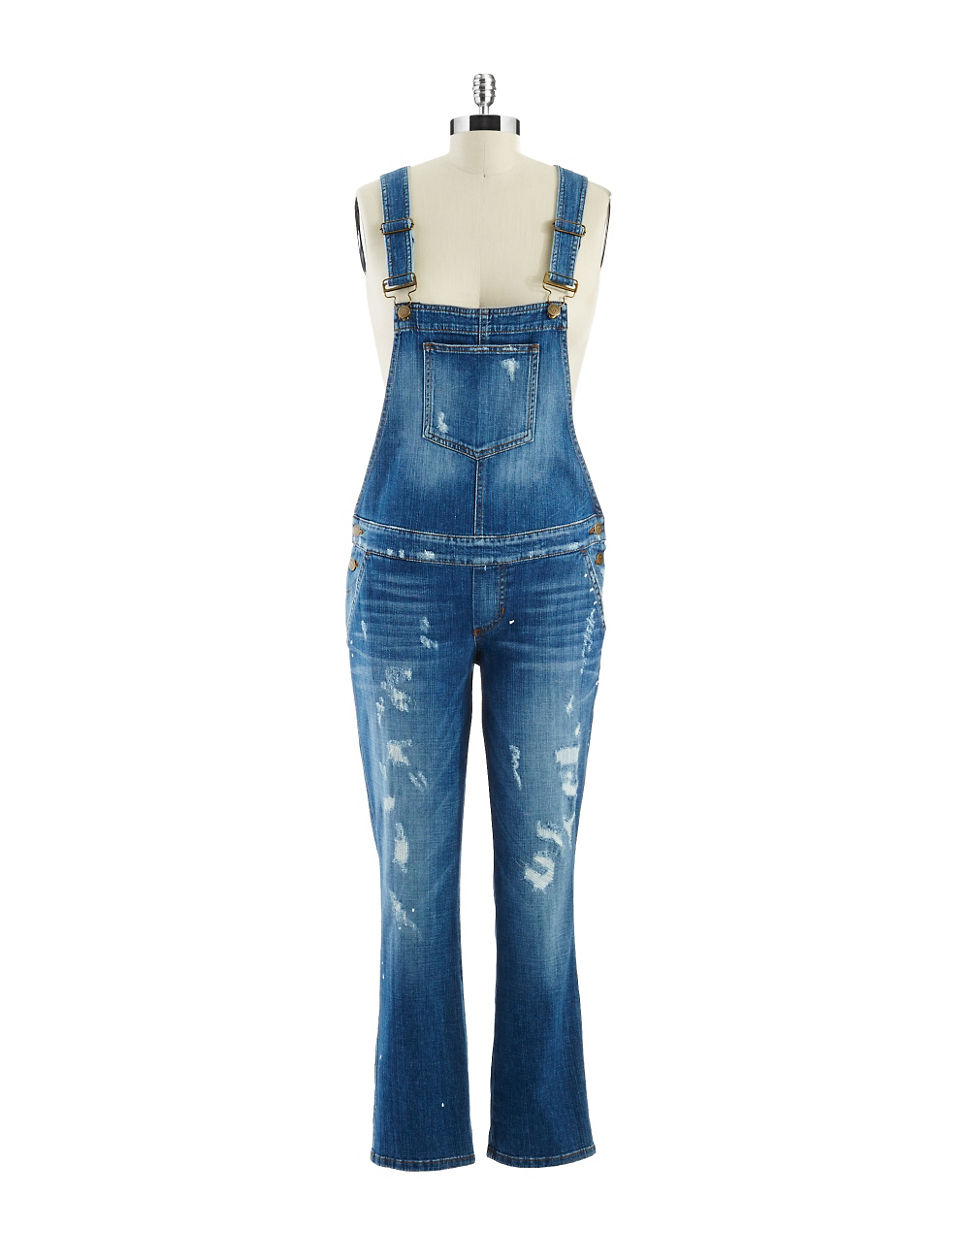 Guess Distressed Denim Overalls in Blue | Lyst